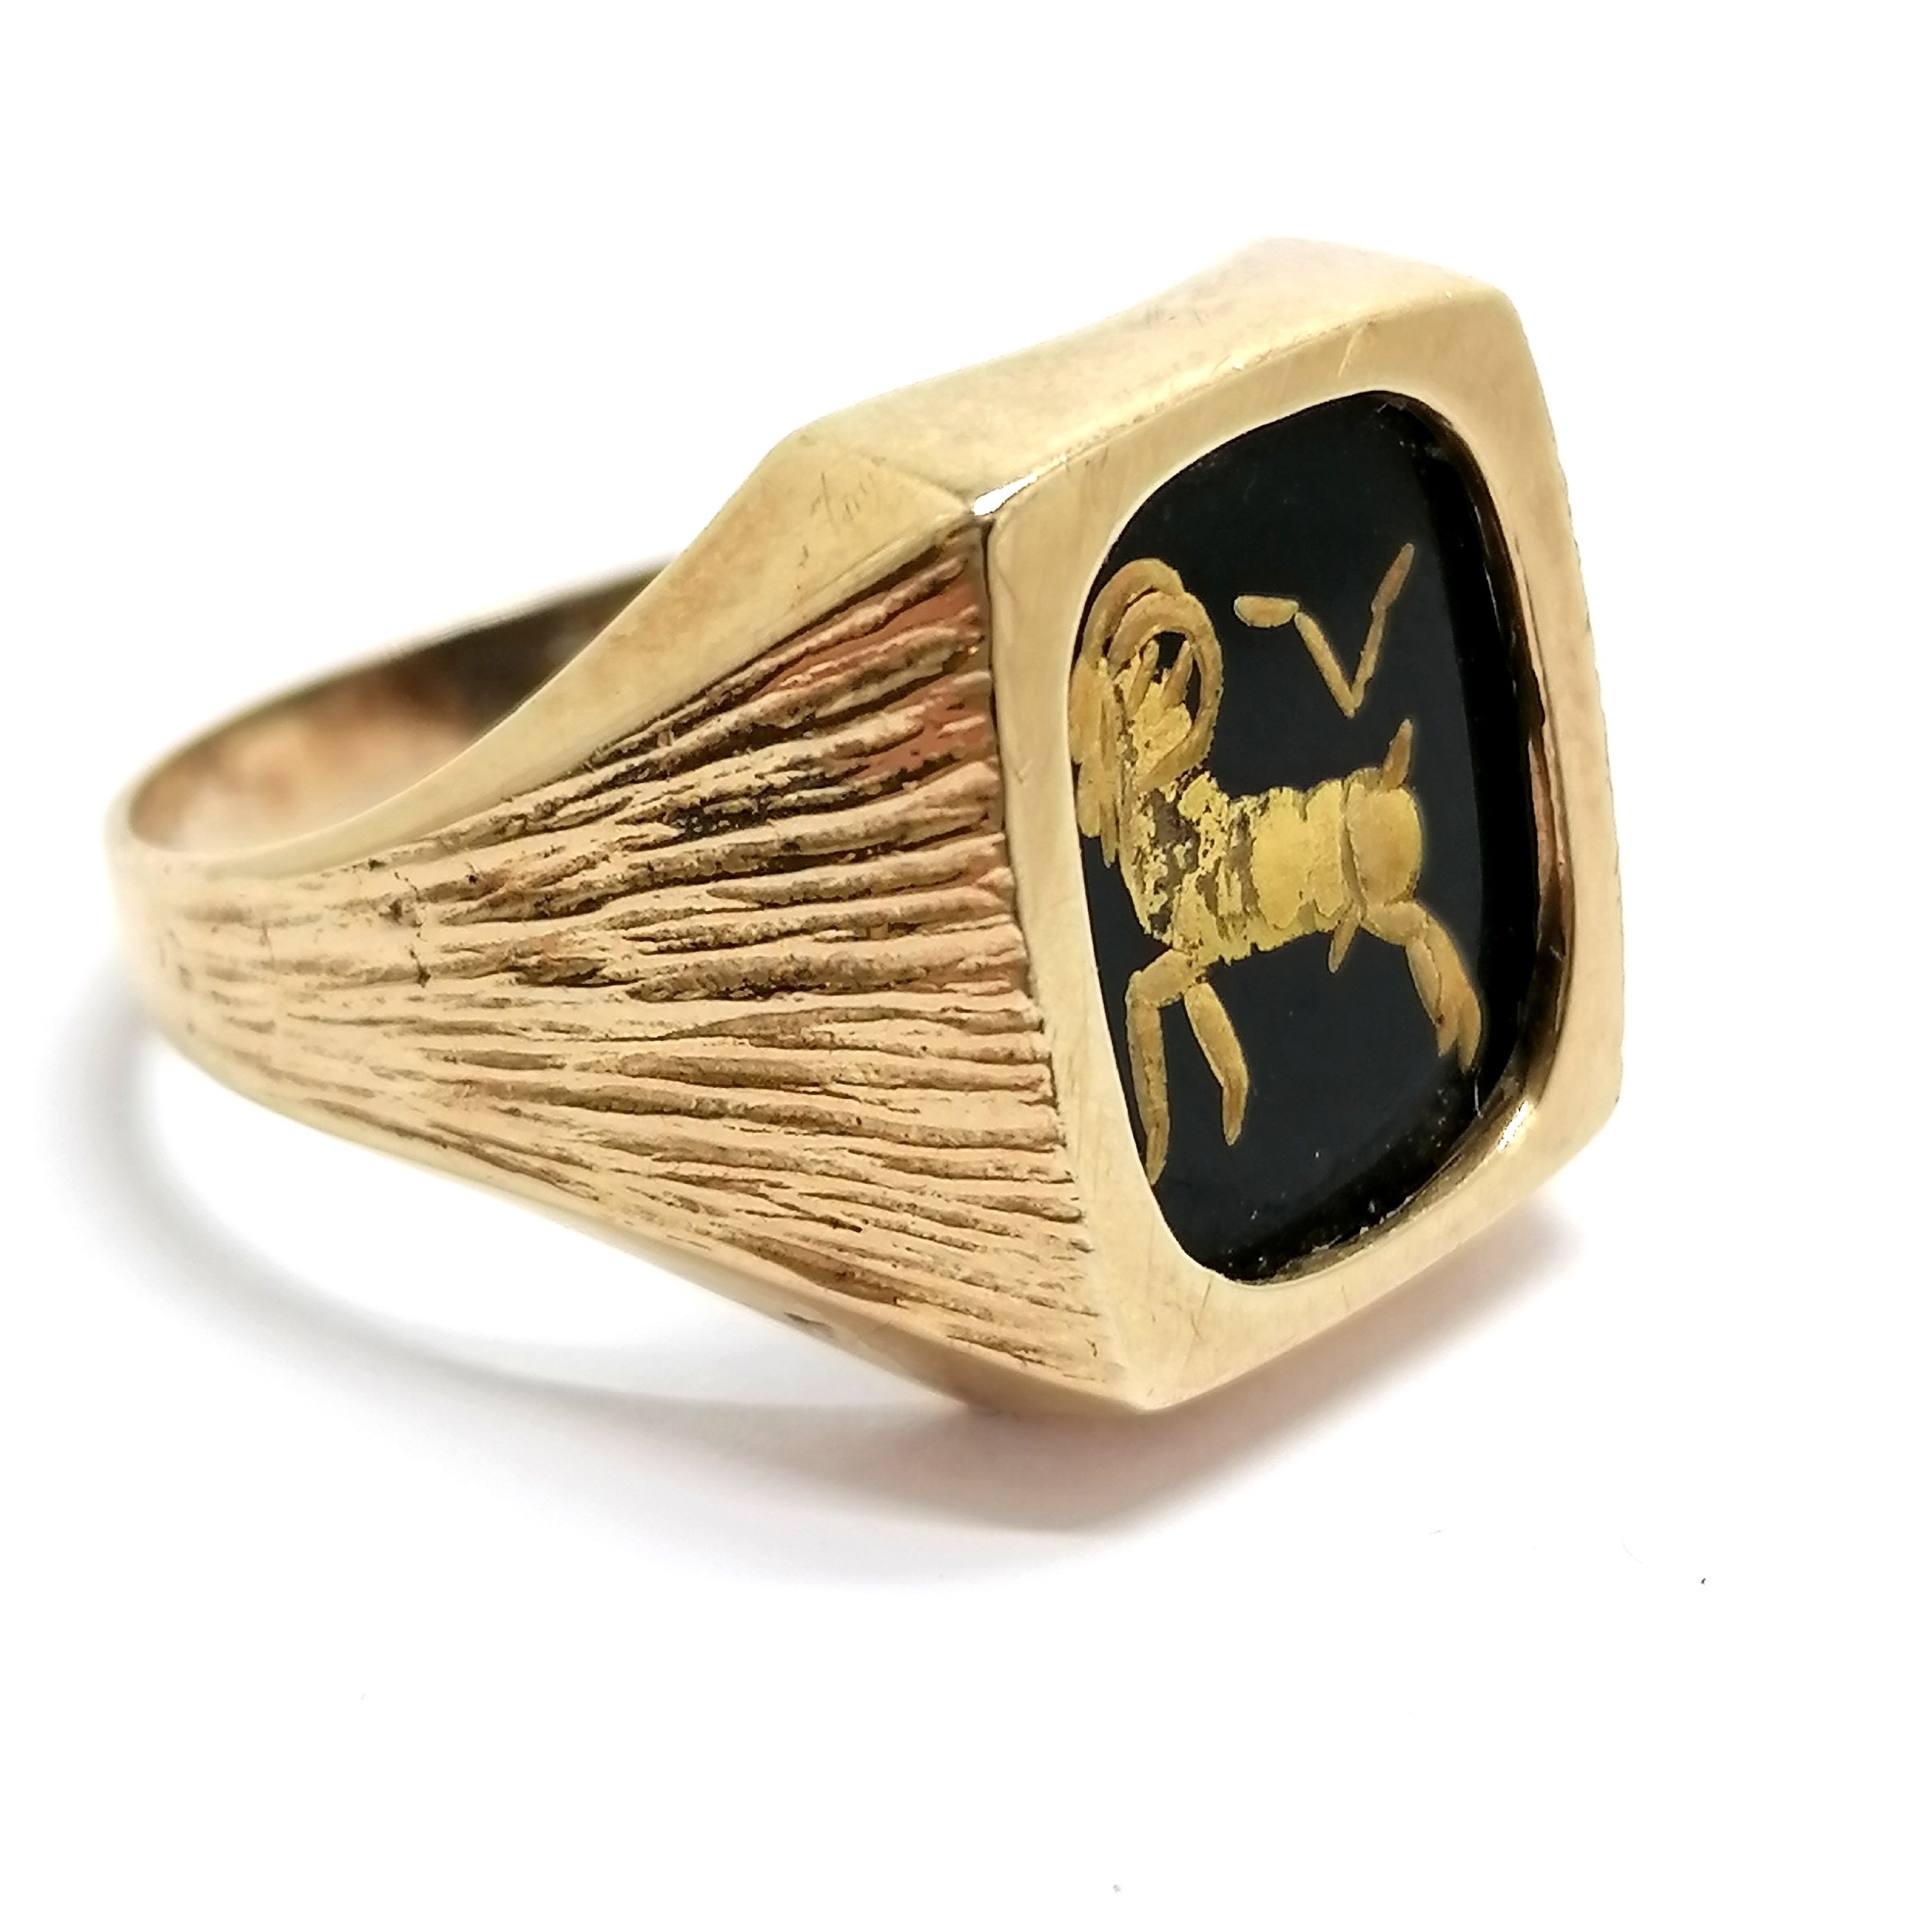 9ct hallmarked gold signet ring with Aries design onyx panel - size U & 5.9g total weight - Image 3 of 3